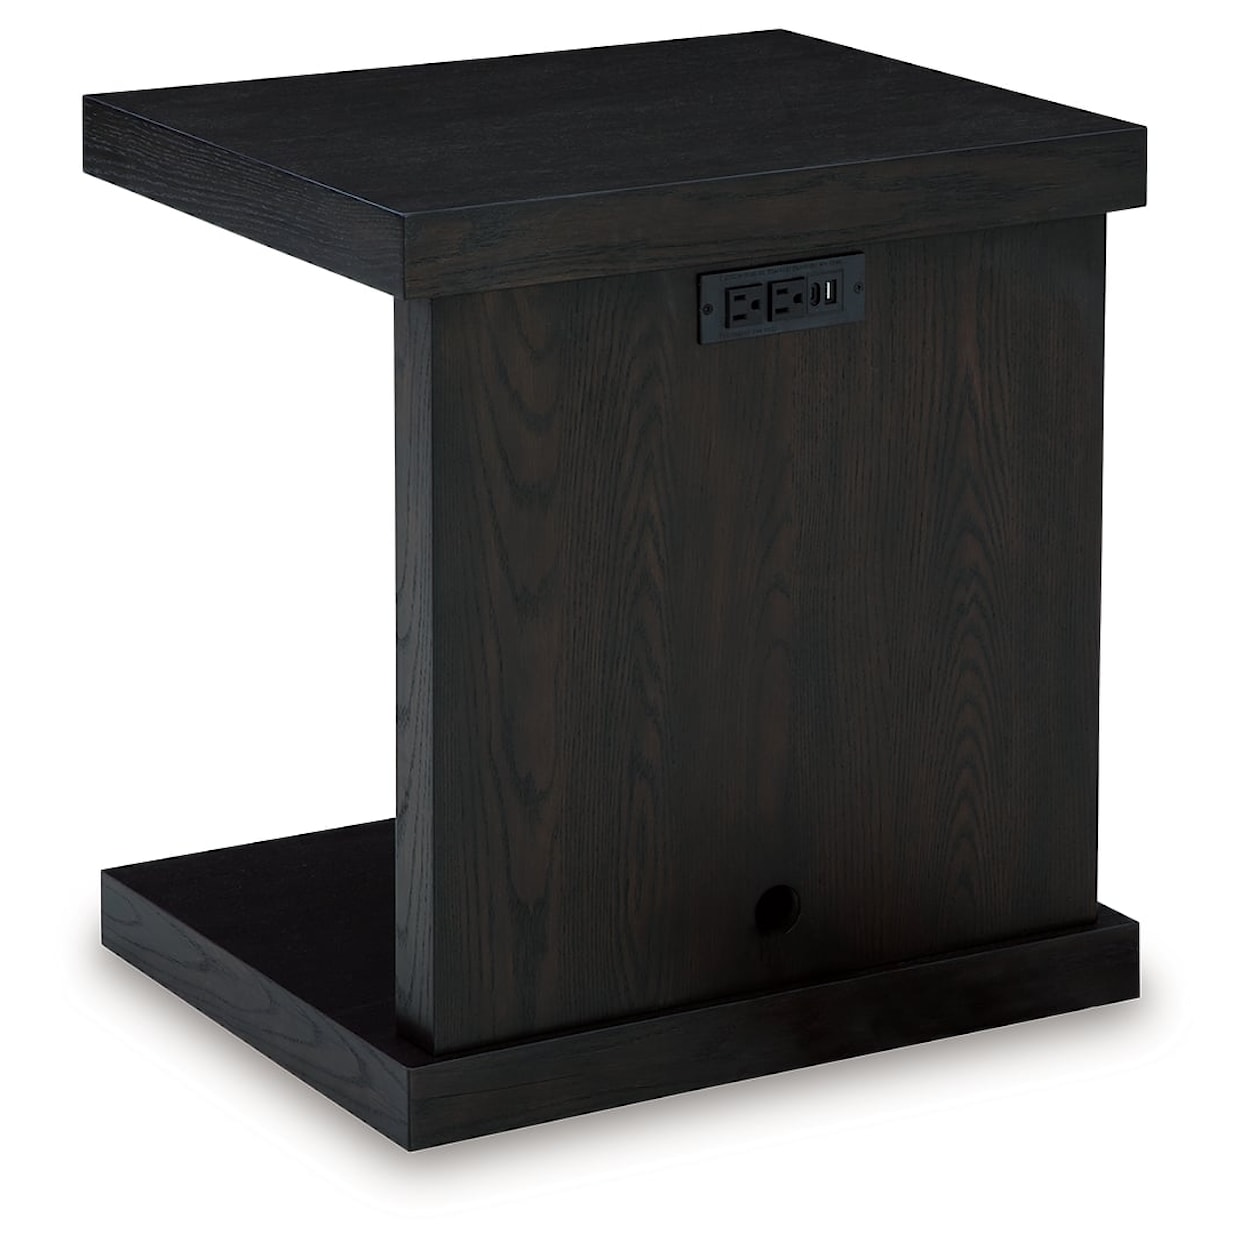 Signature Design by Ashley Furniture Kocomore Chairside End Table